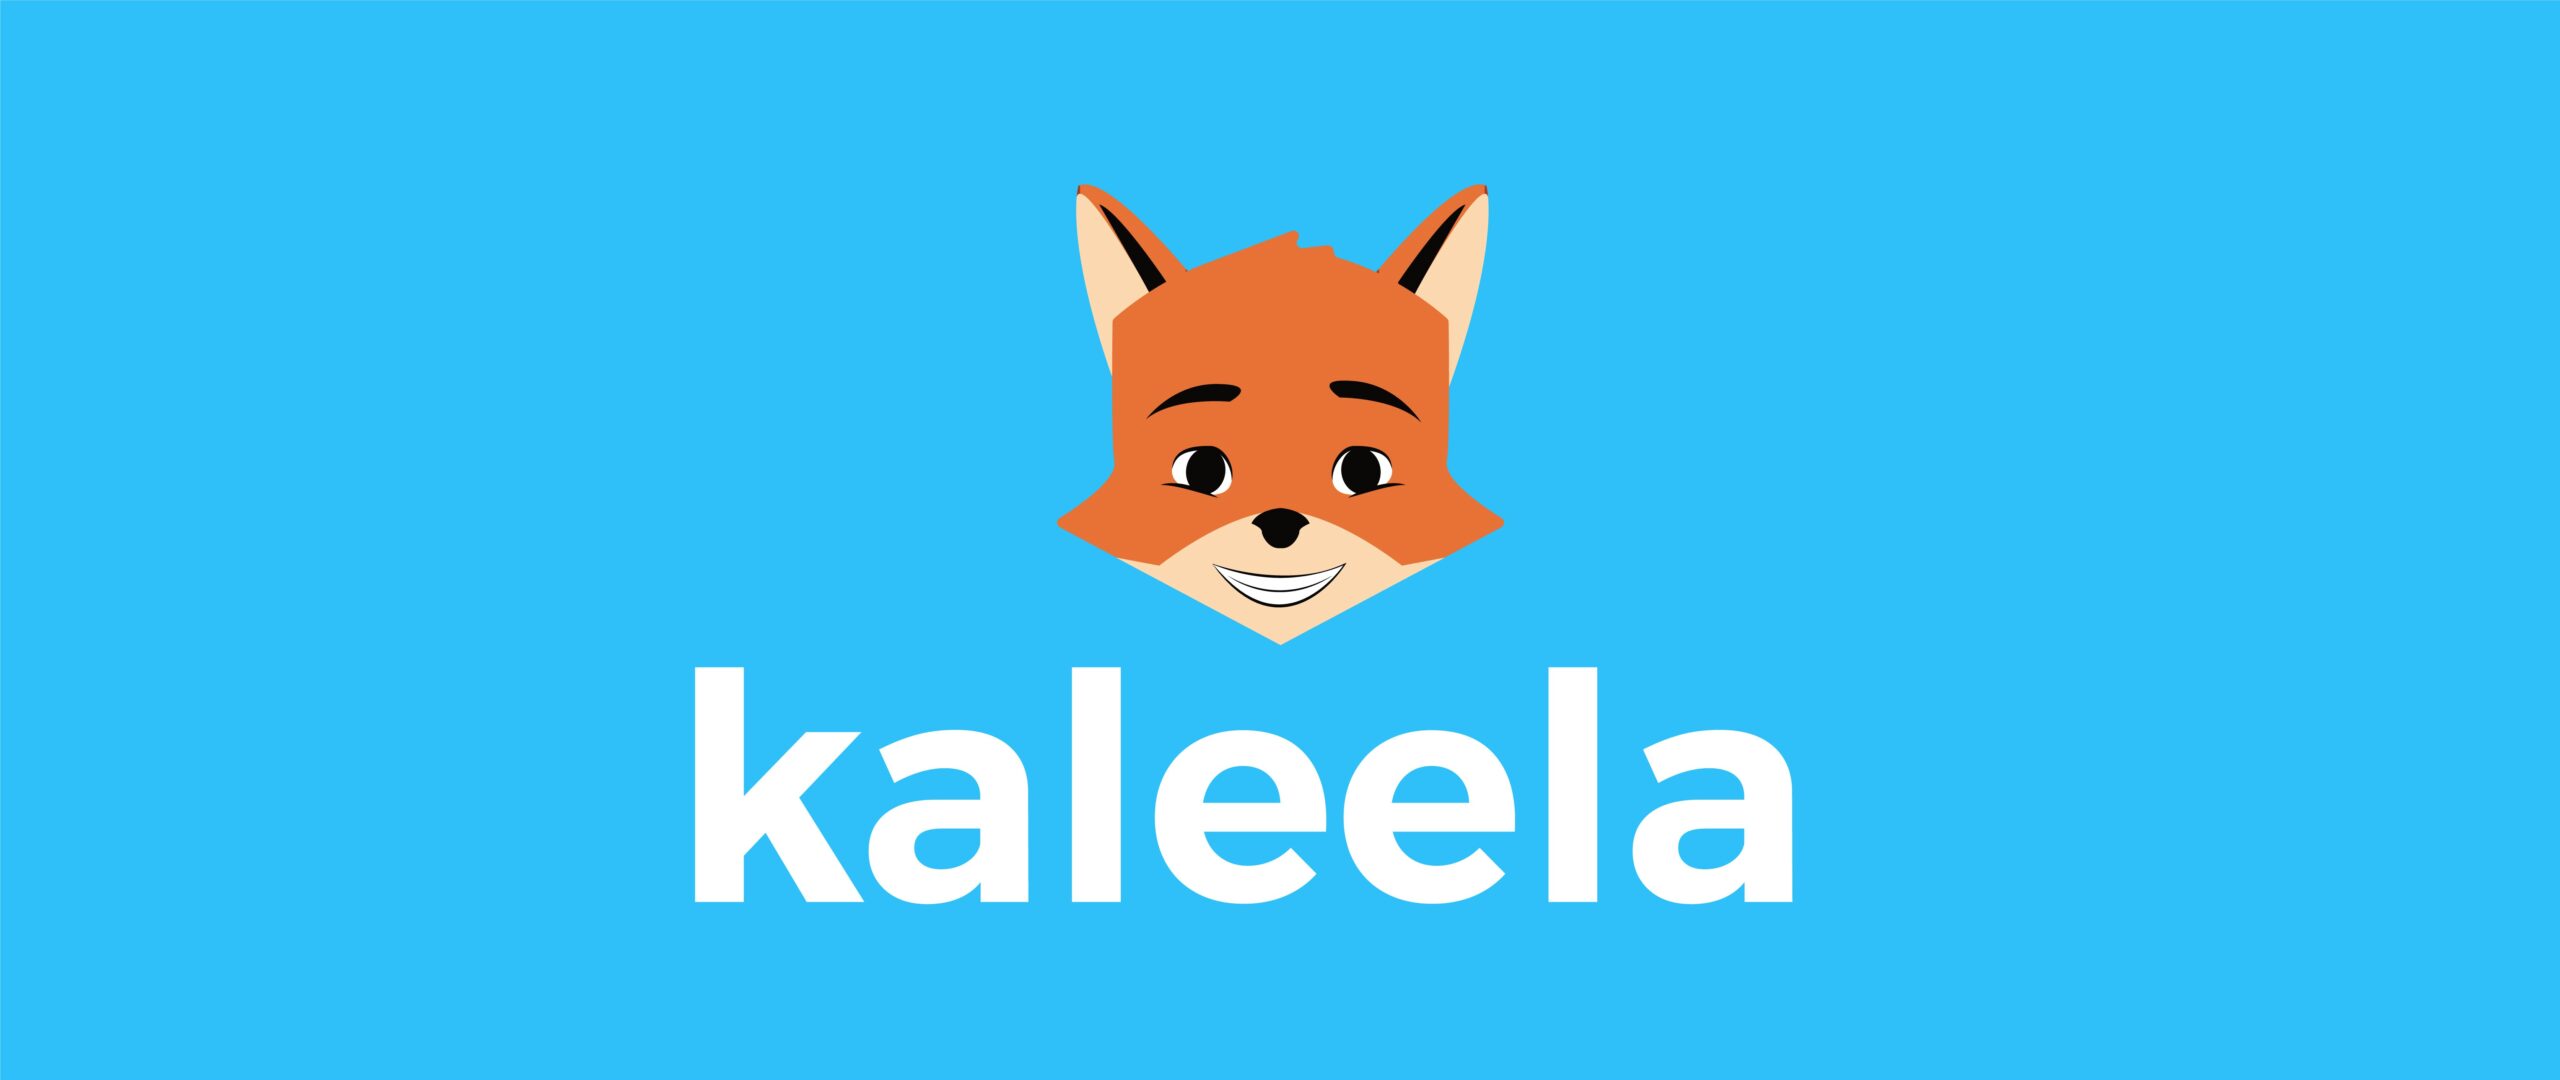 Why We Chose the Name Kaleela for Our Arabic Language Learning Application